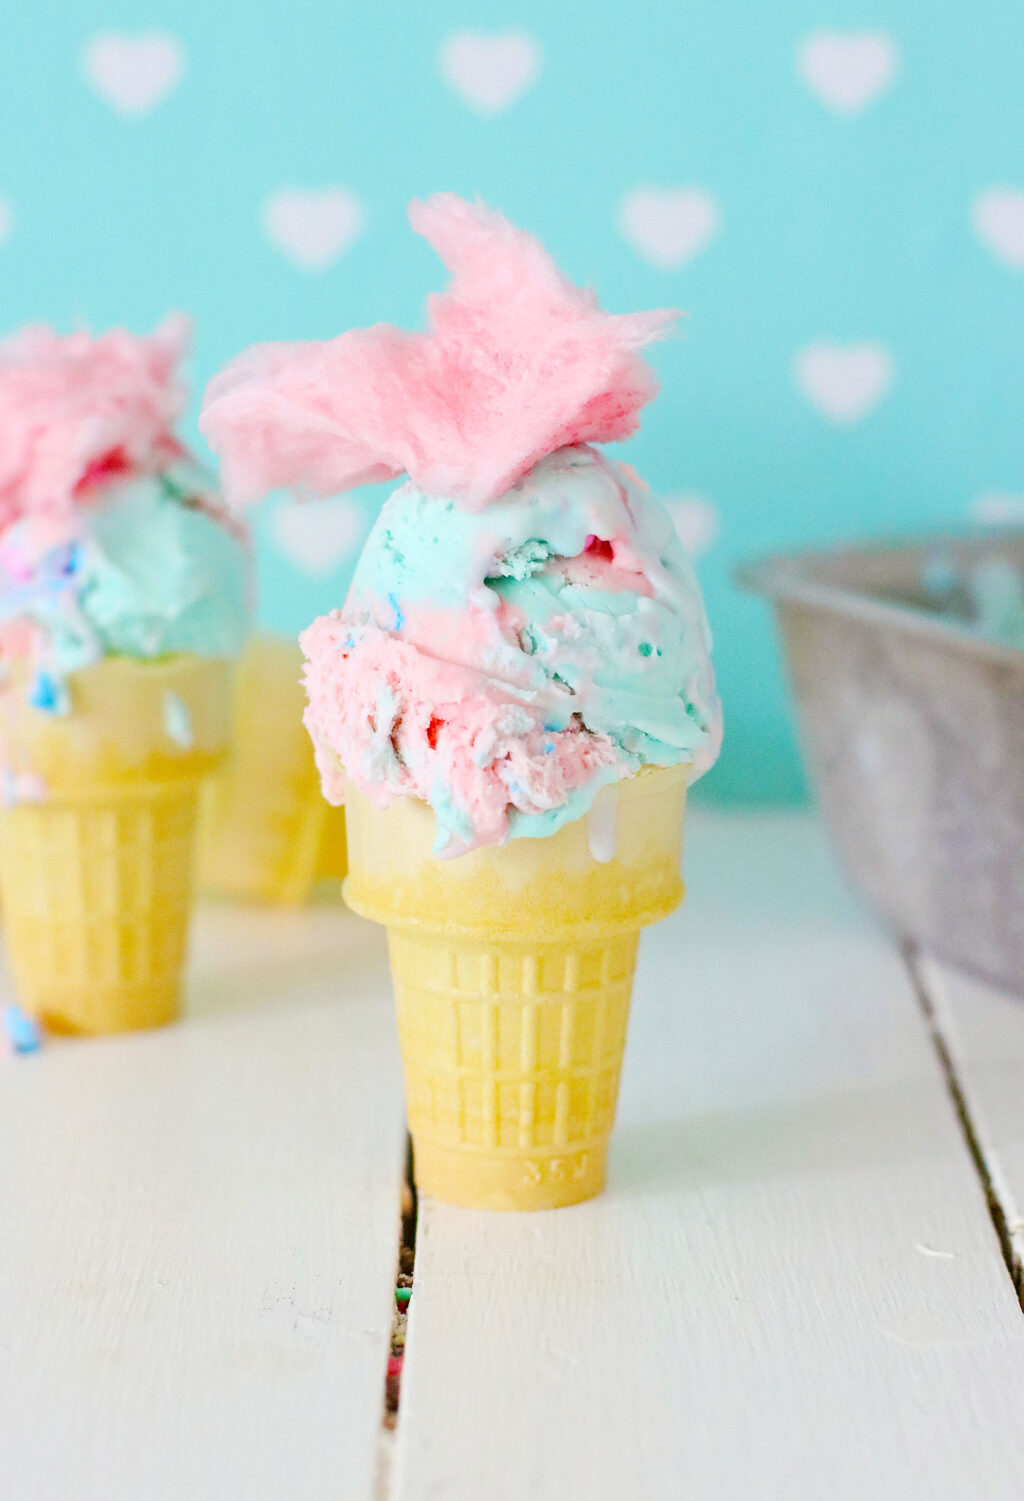 homemade cotton candy ice cream in a waffle cone